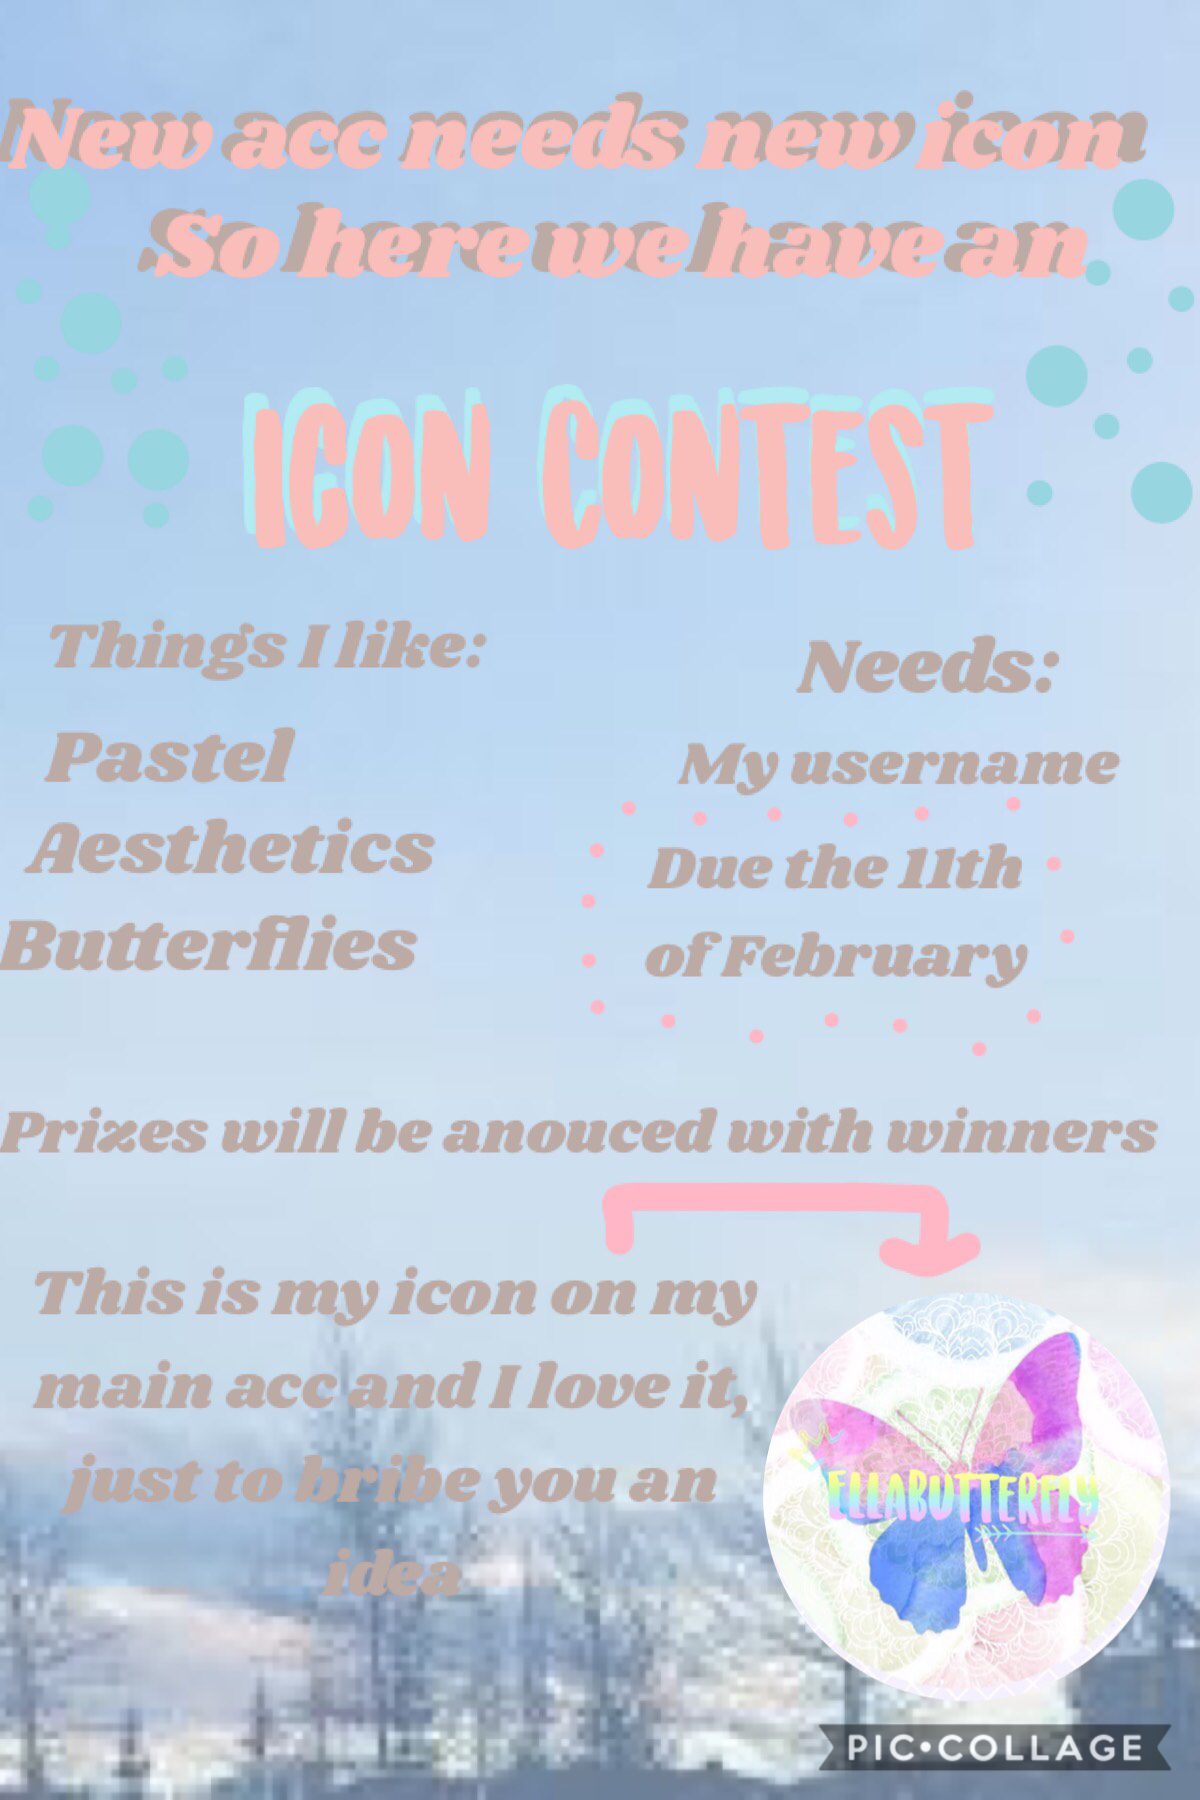 Plz enter and spread the word if you could, sorry for the ugly layout 😑